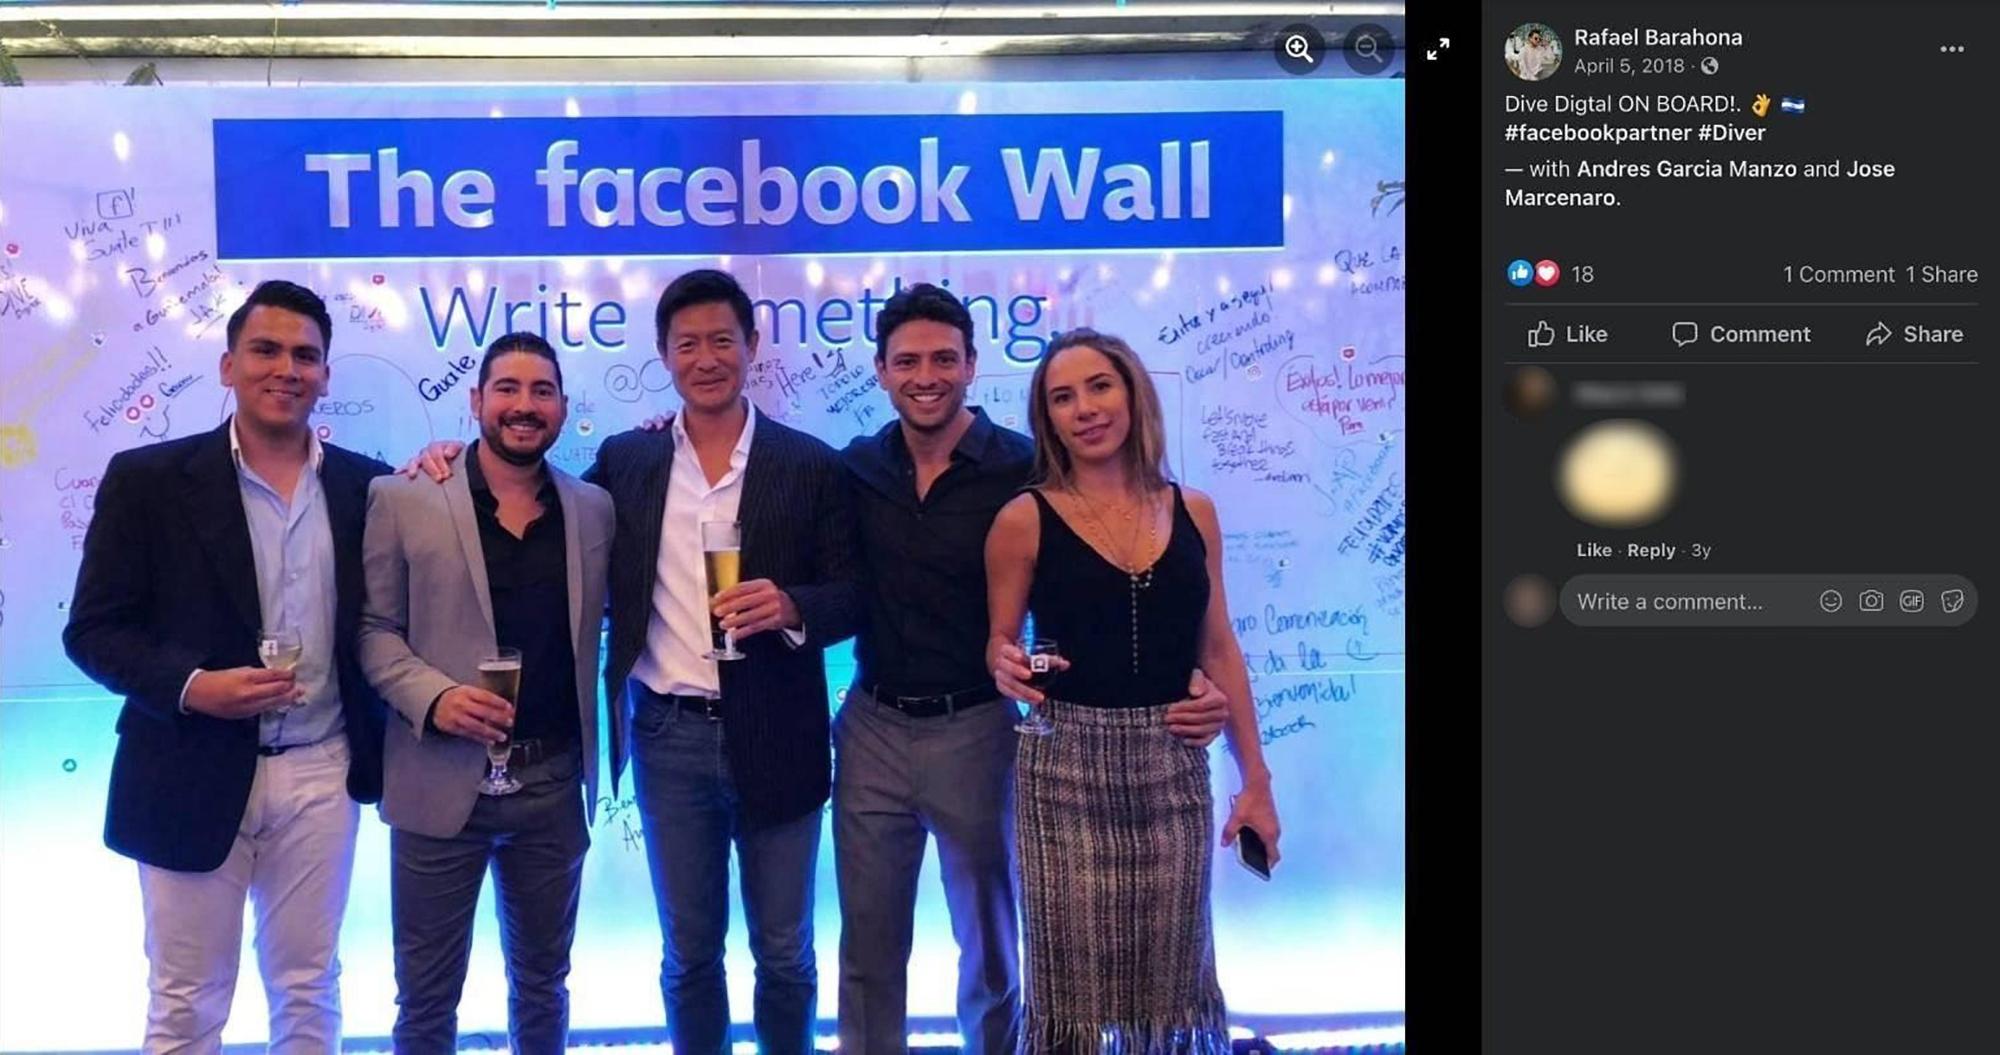 García Manzo (second to the right) with José Marcenaro (second to the left) at an event as Dive Digital on April 5, 2018. From the Facebook page of Rafael Barahona (far left), Dive Digital commercial director.